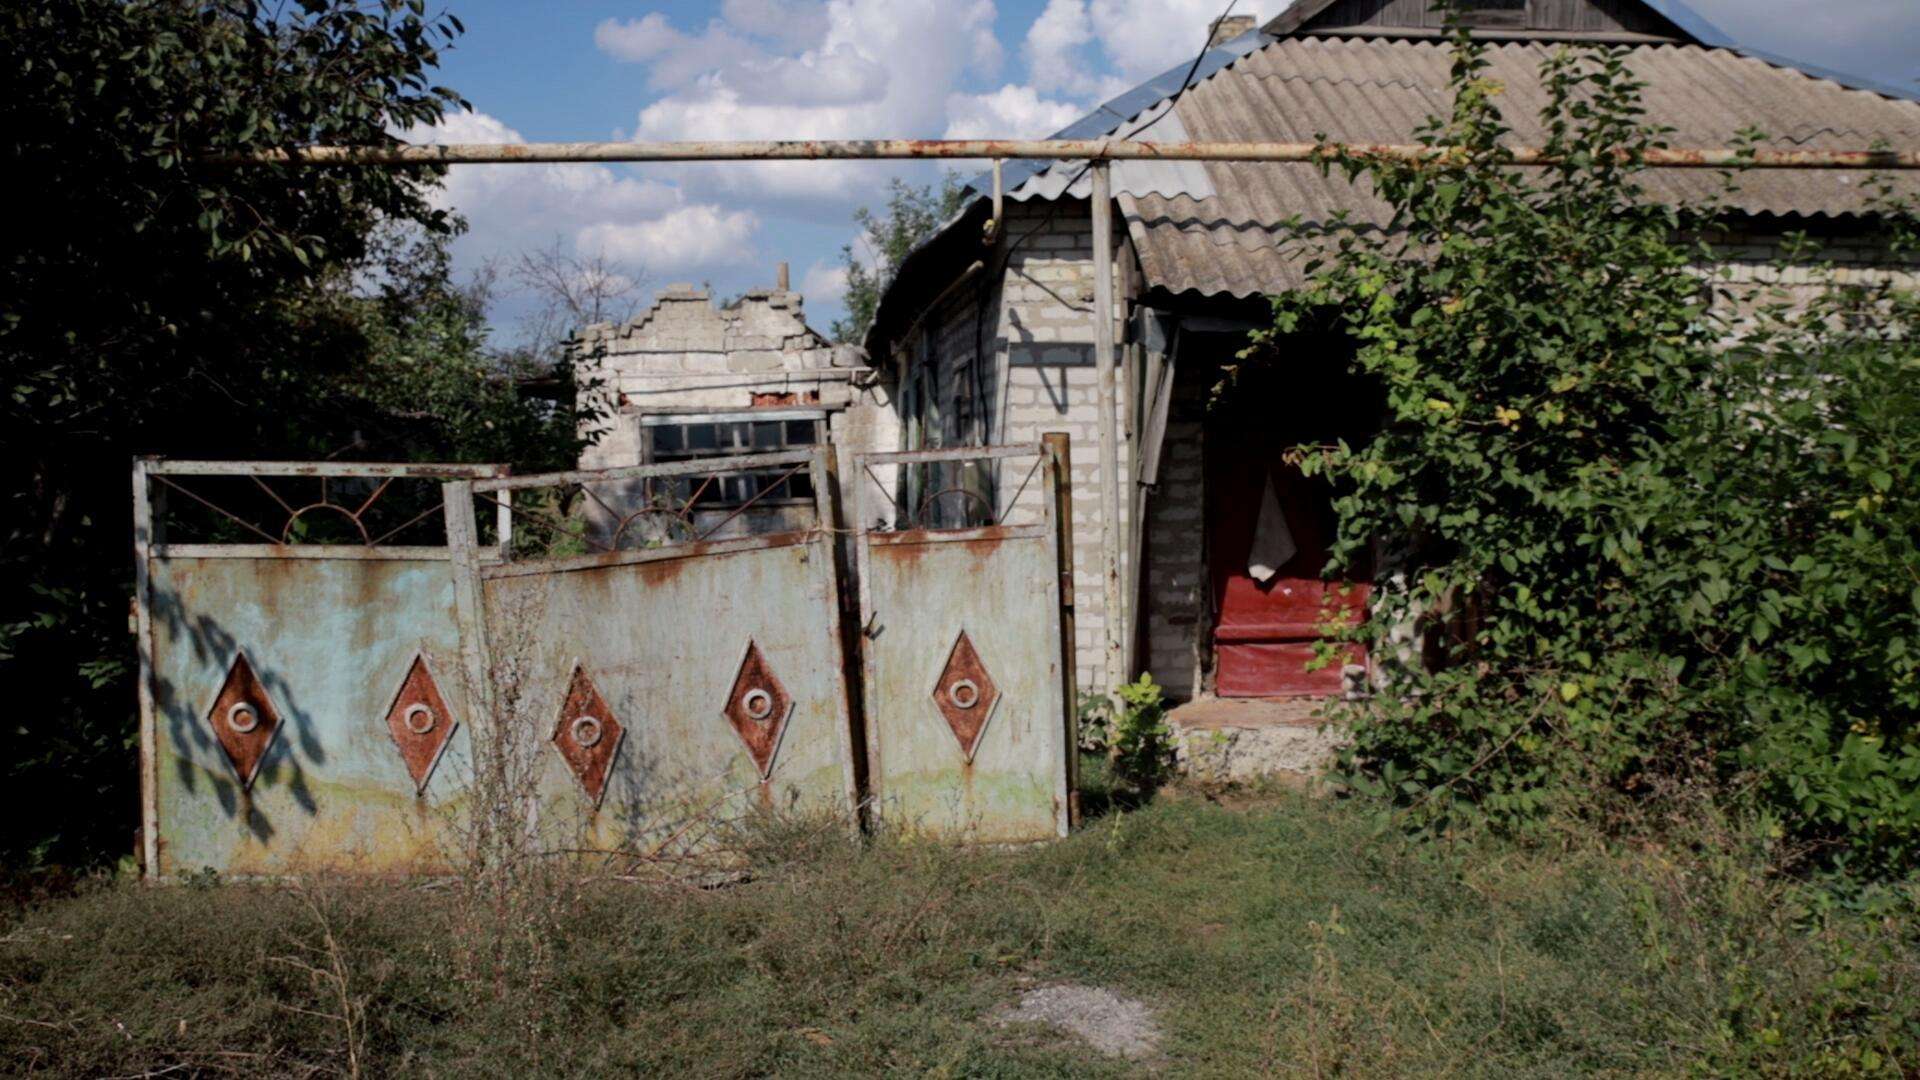 A dilapidated house with tin roof and broken gate